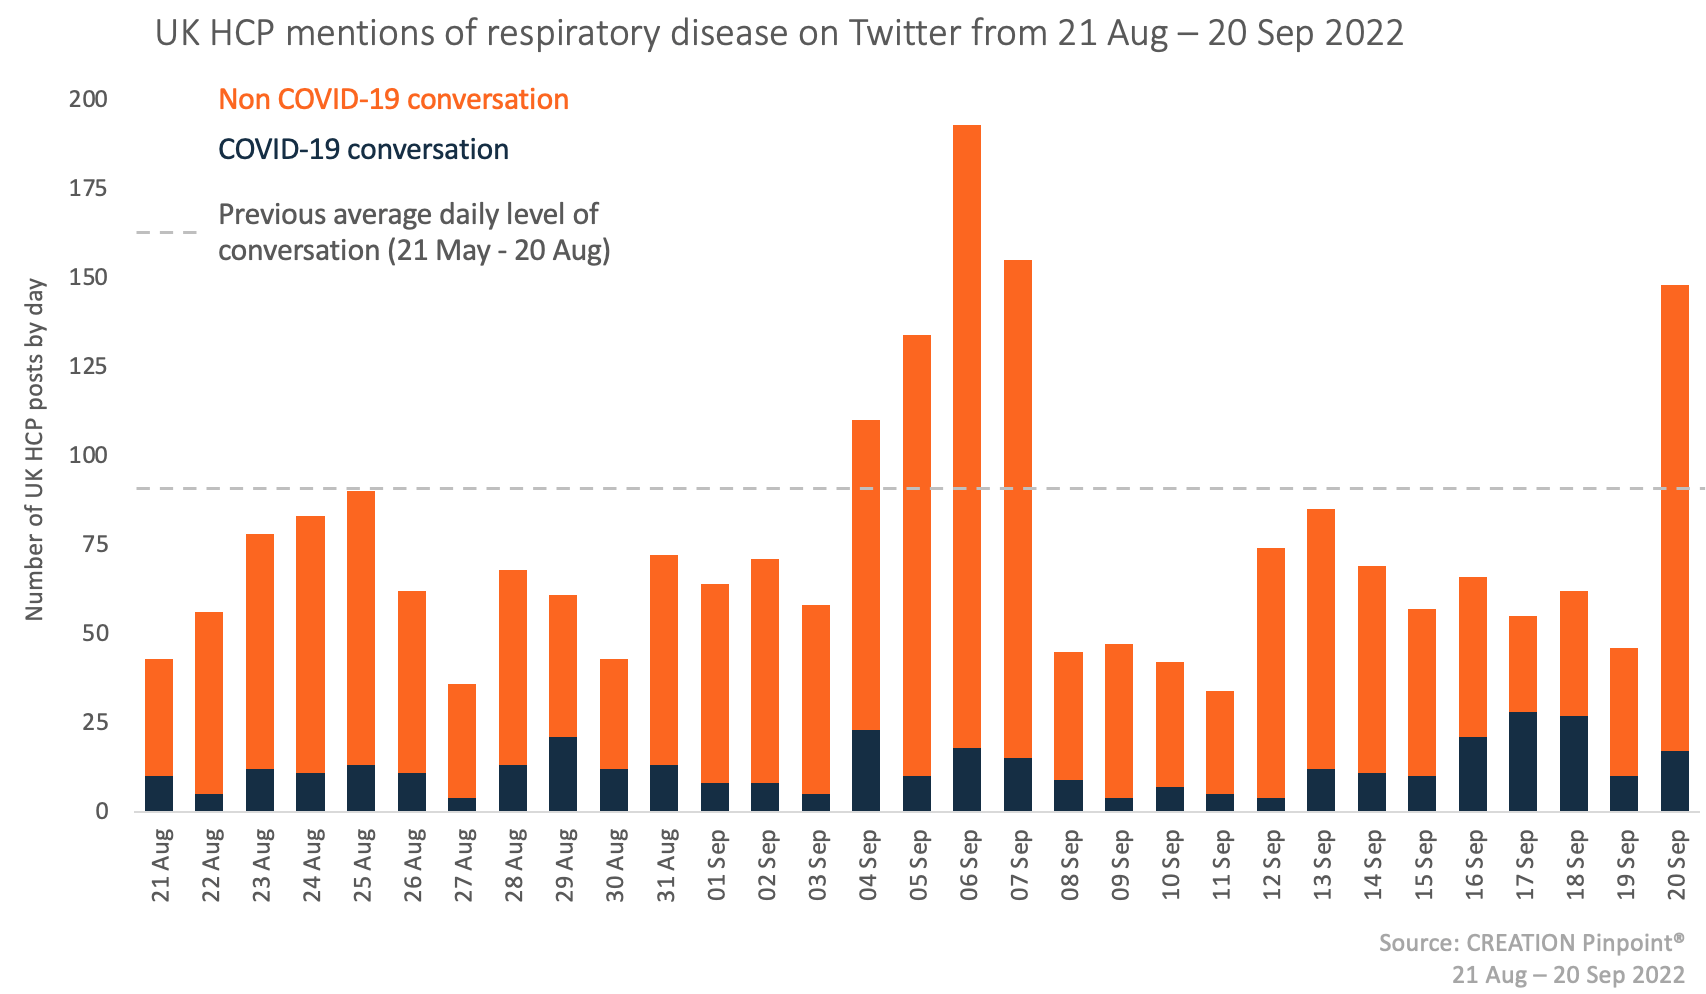 Graph showing UK HCP mentions on Twitter in September